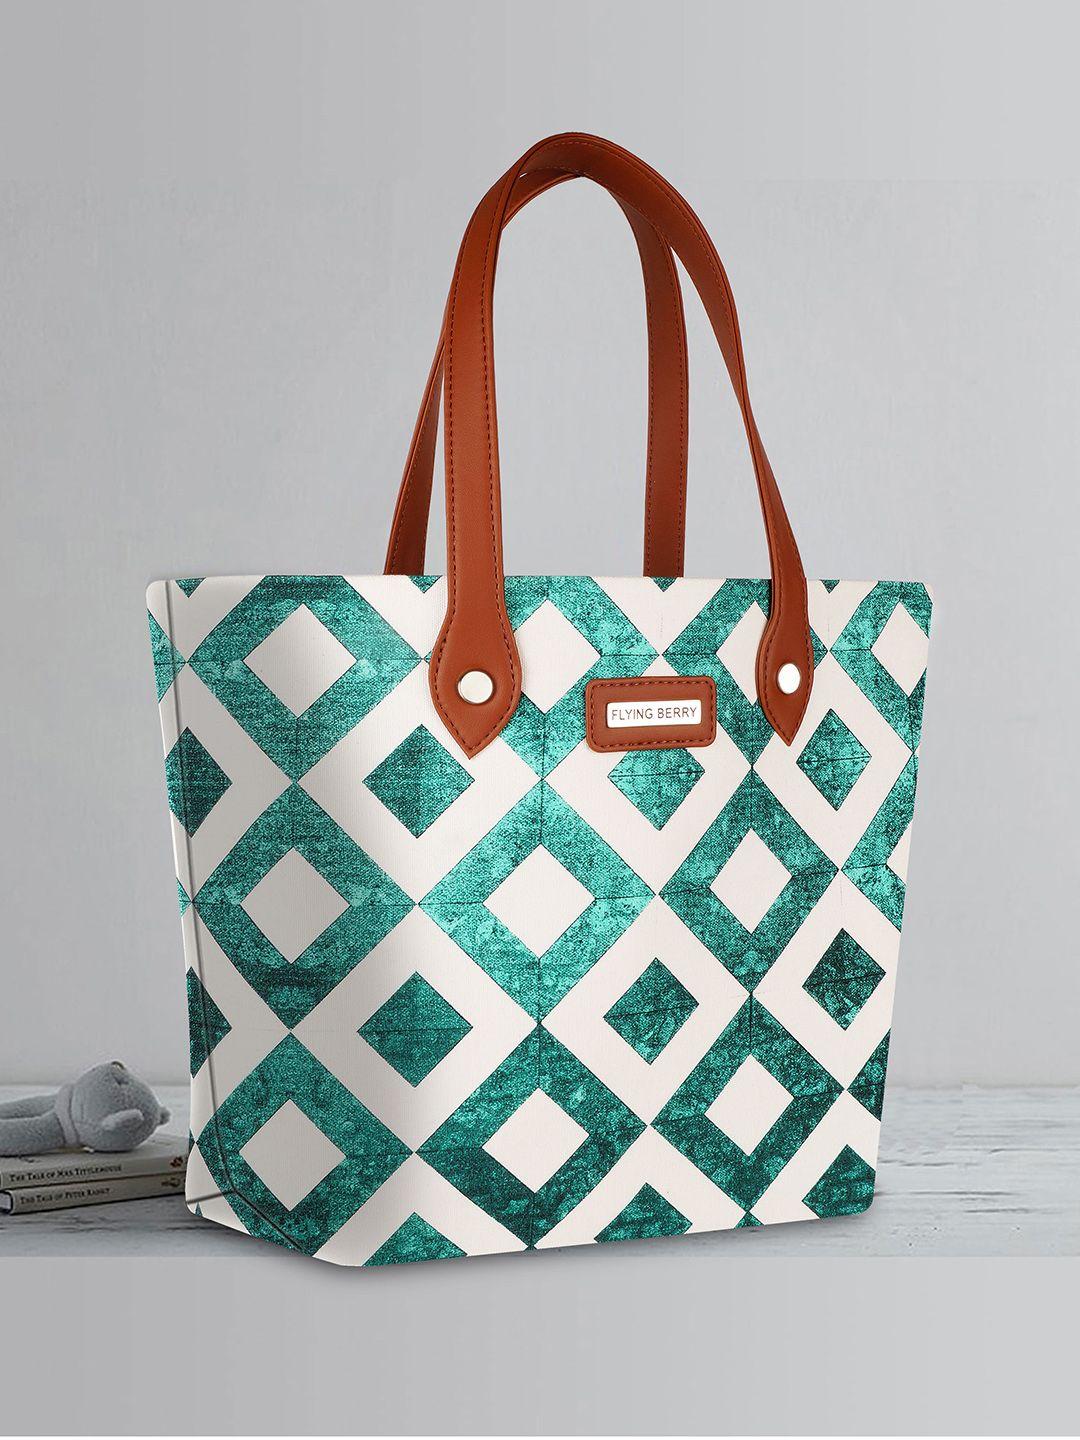 flying berry green printed tote bag